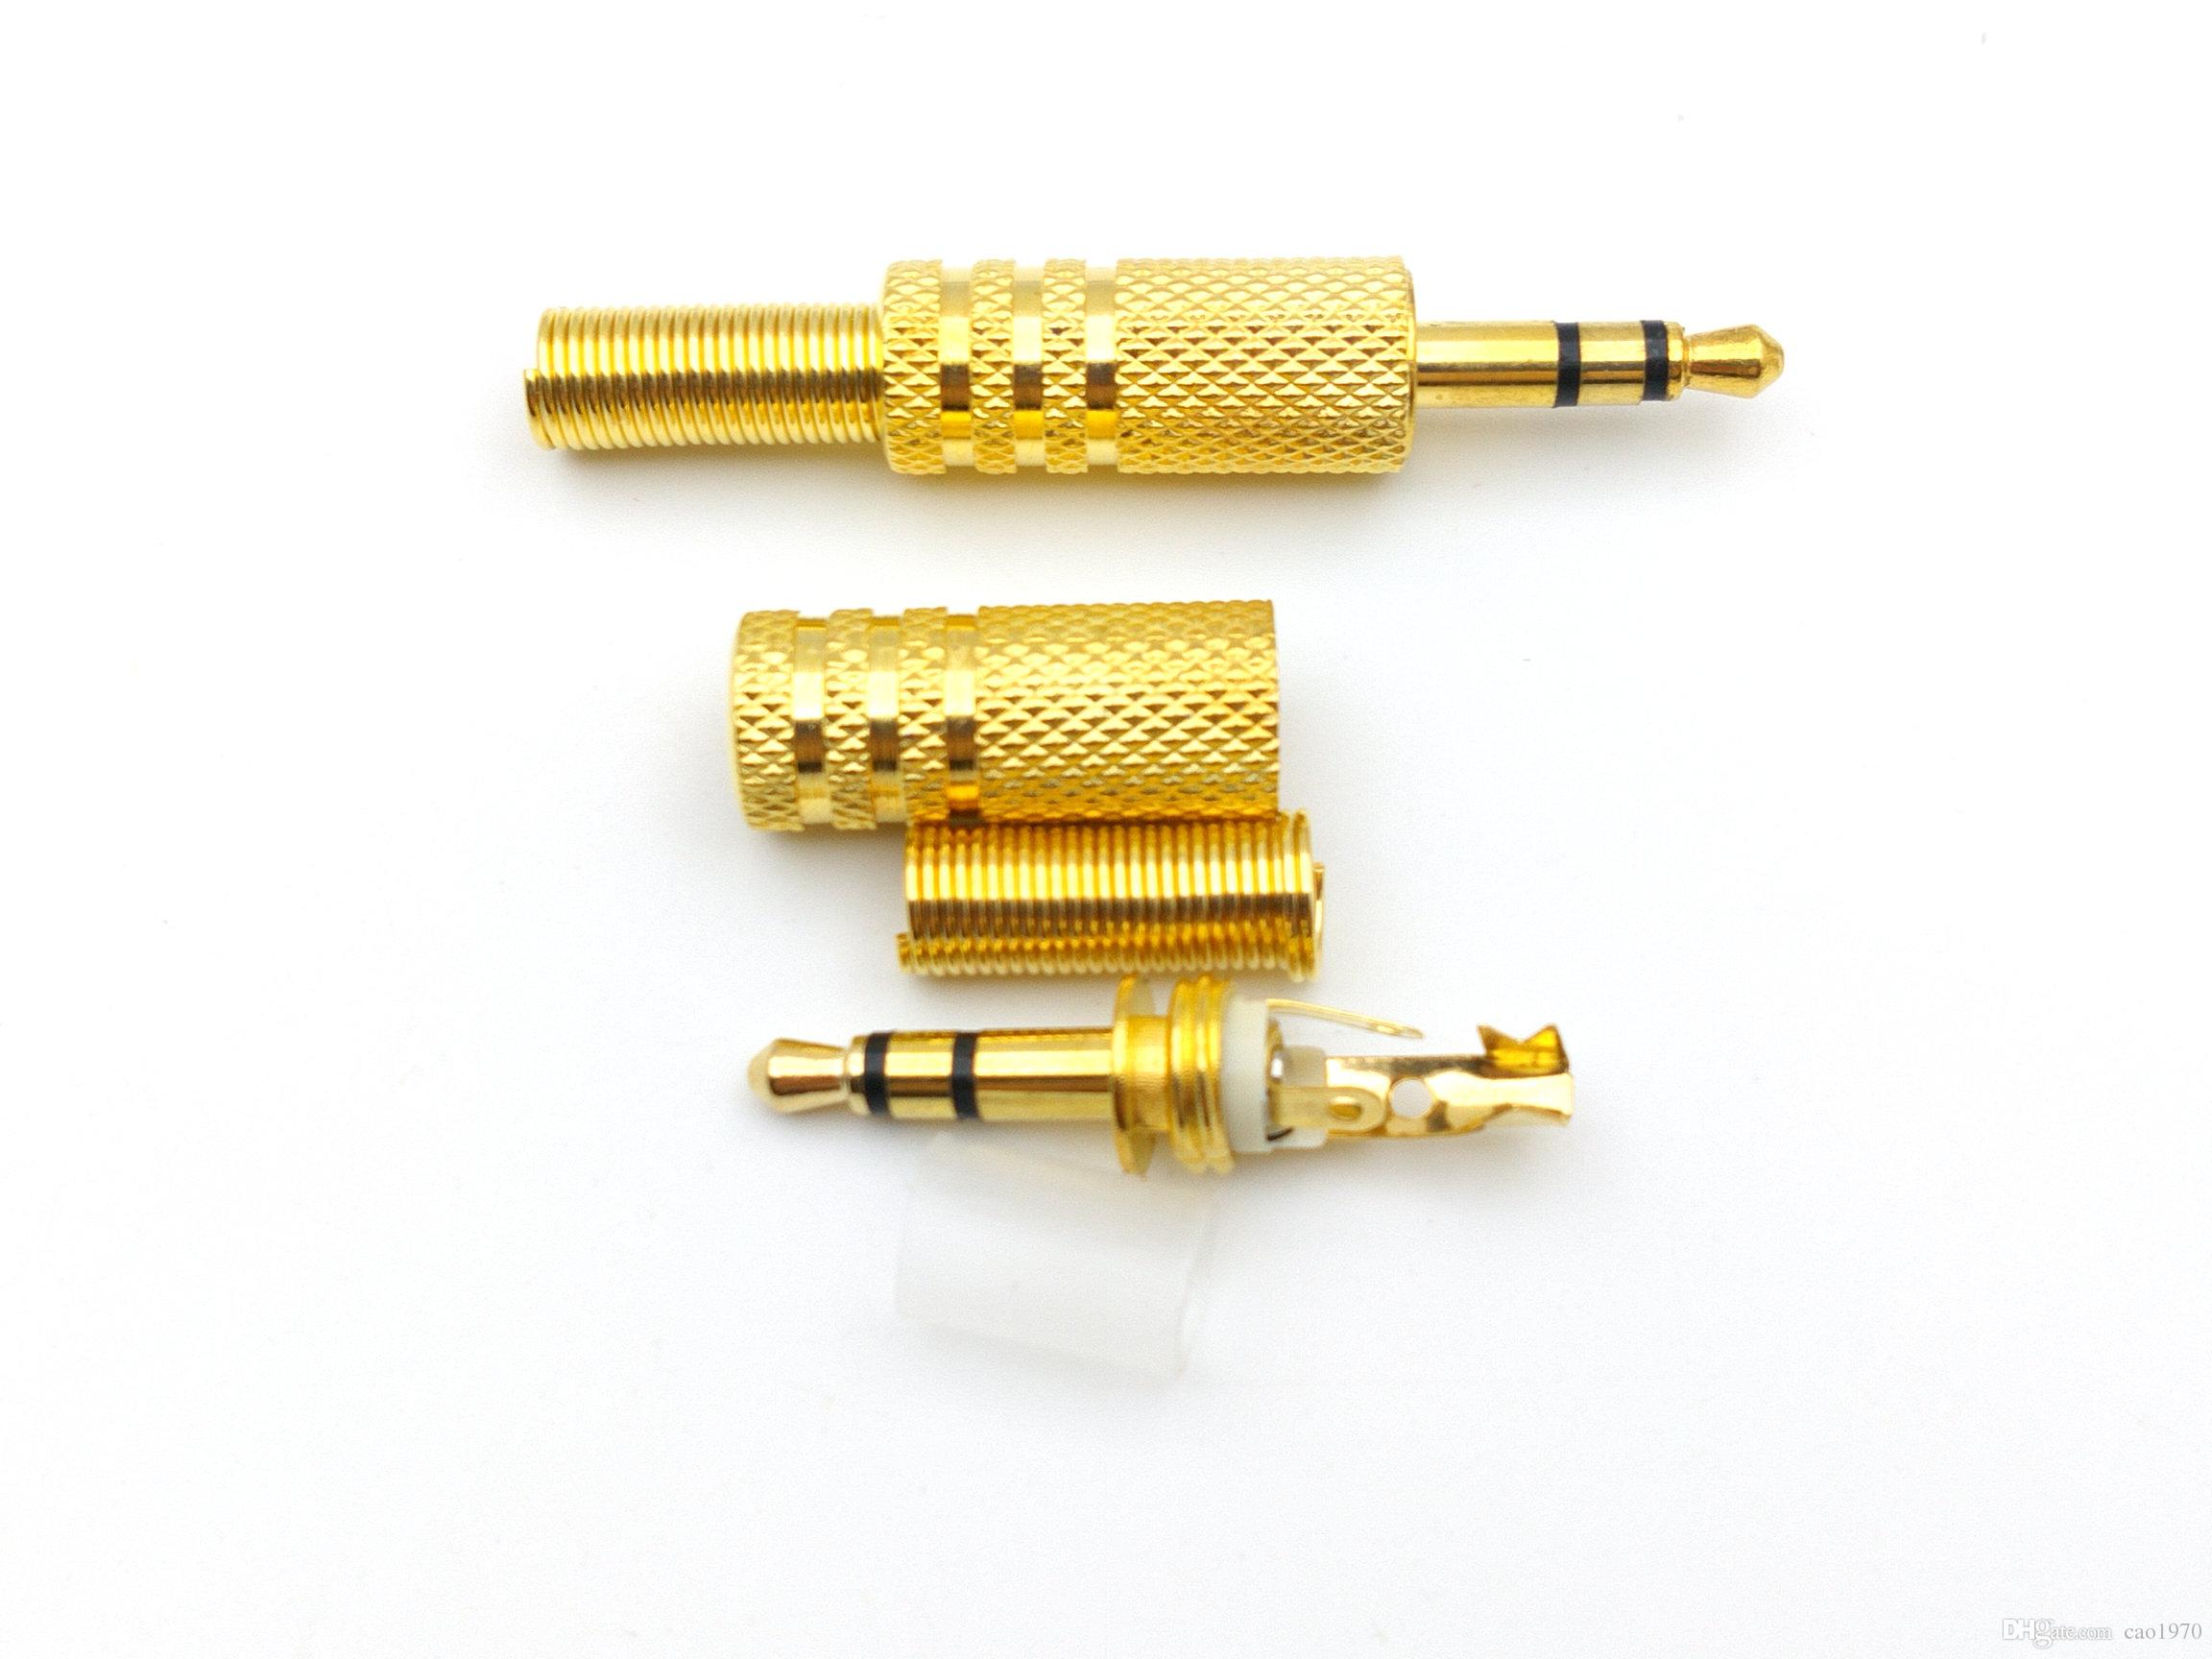 1000pcs gold-plated Stereo 3.5mm 1/8" male adapter audio jack plug connectors